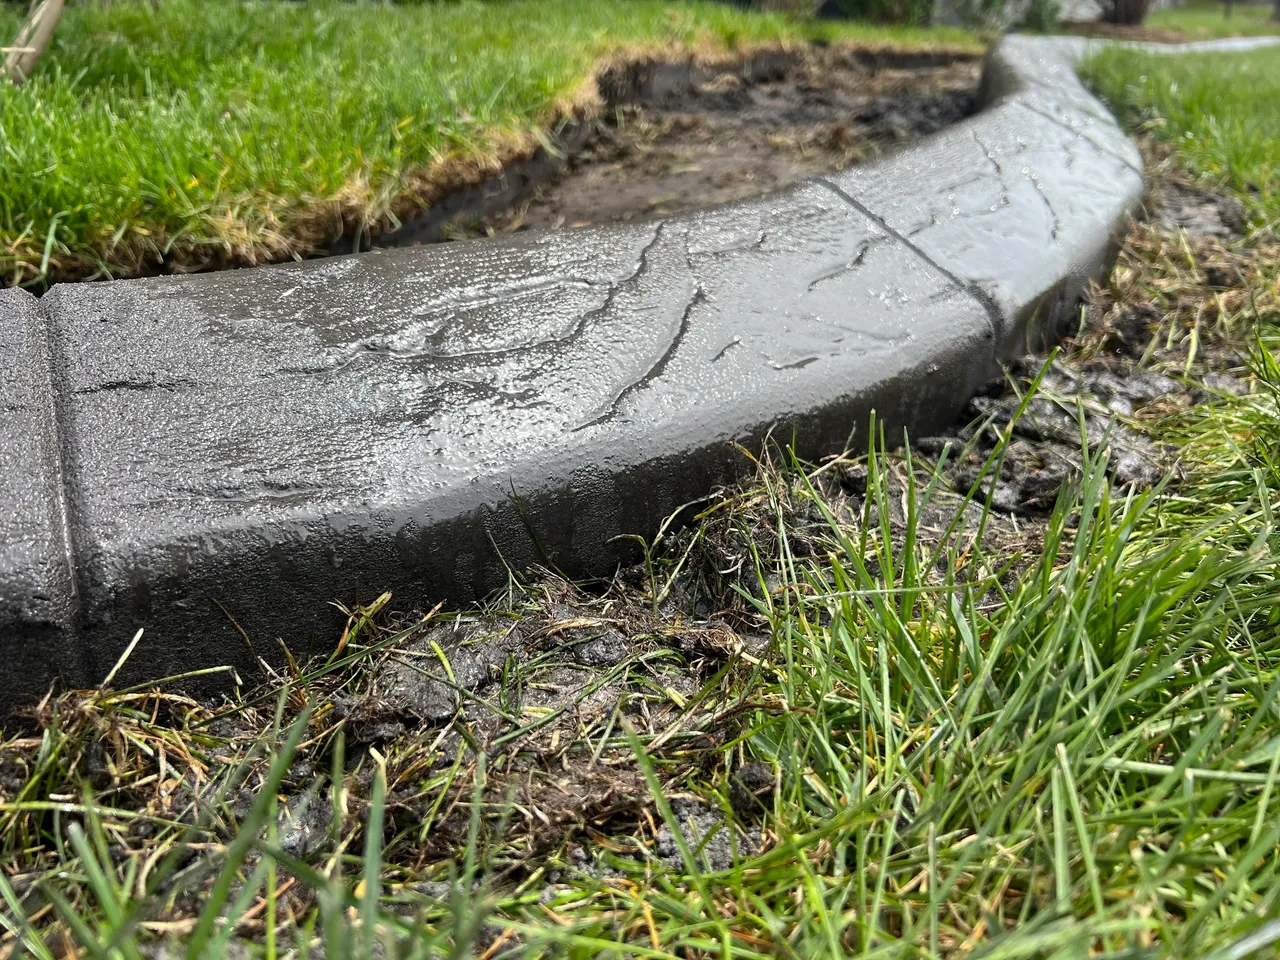 A close up of the edge of a concrete path